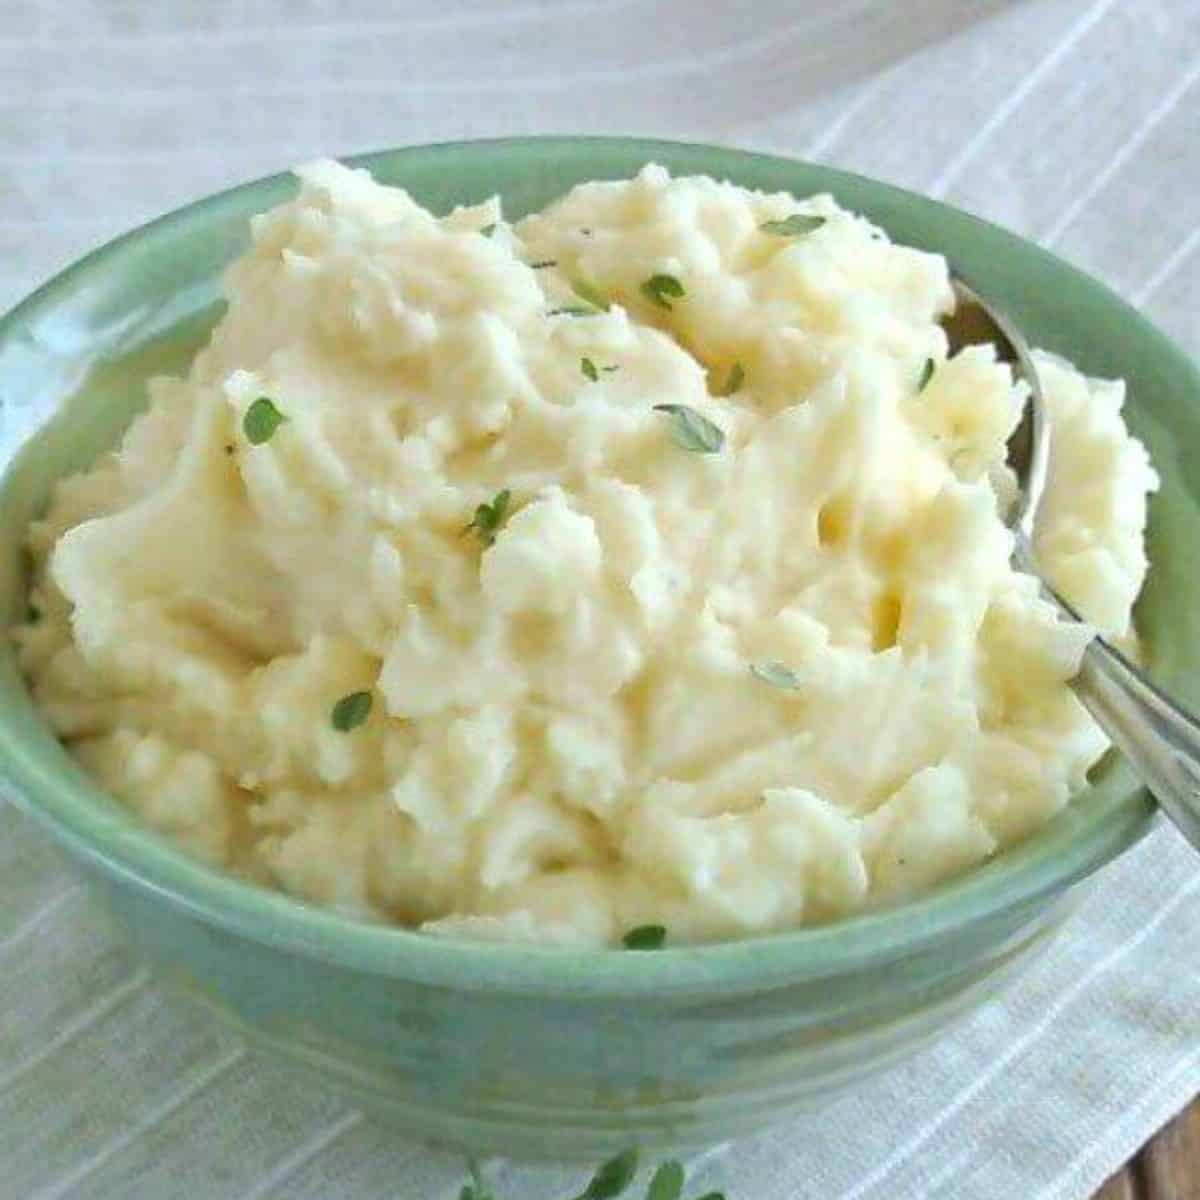 Crock pot mashed potatoes are in a green bowl with thyme sprinkled on top.